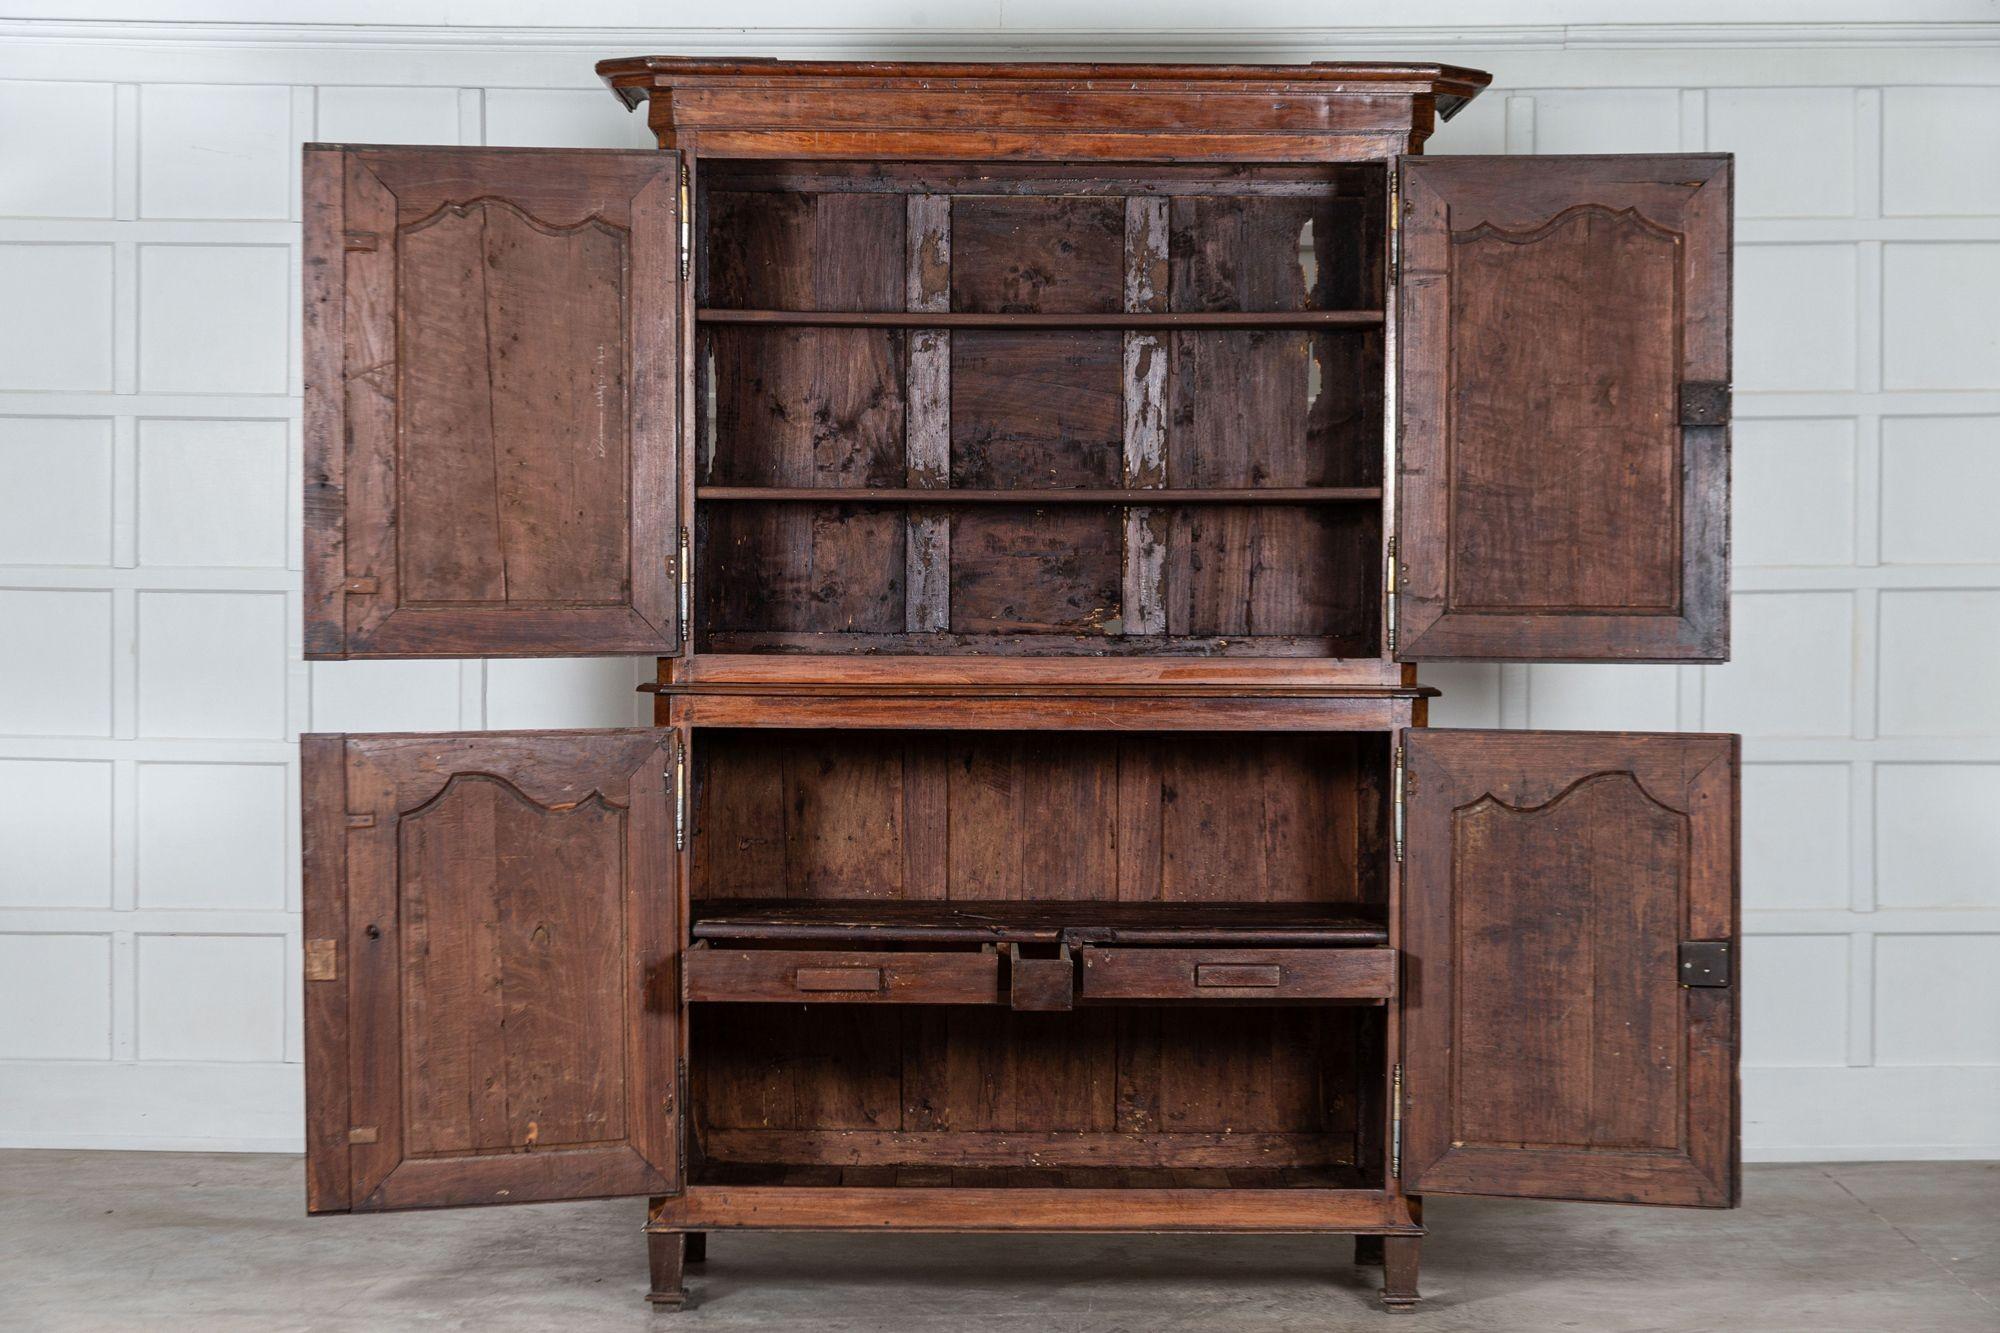 circa 1800
Large French 19th century walnut buffet Deux Corps
Sourced from the South of France
We can also customise existing pieces to suit your scheme/requirements. We have our own workshop, restorers and finishers. From adapting to finishing